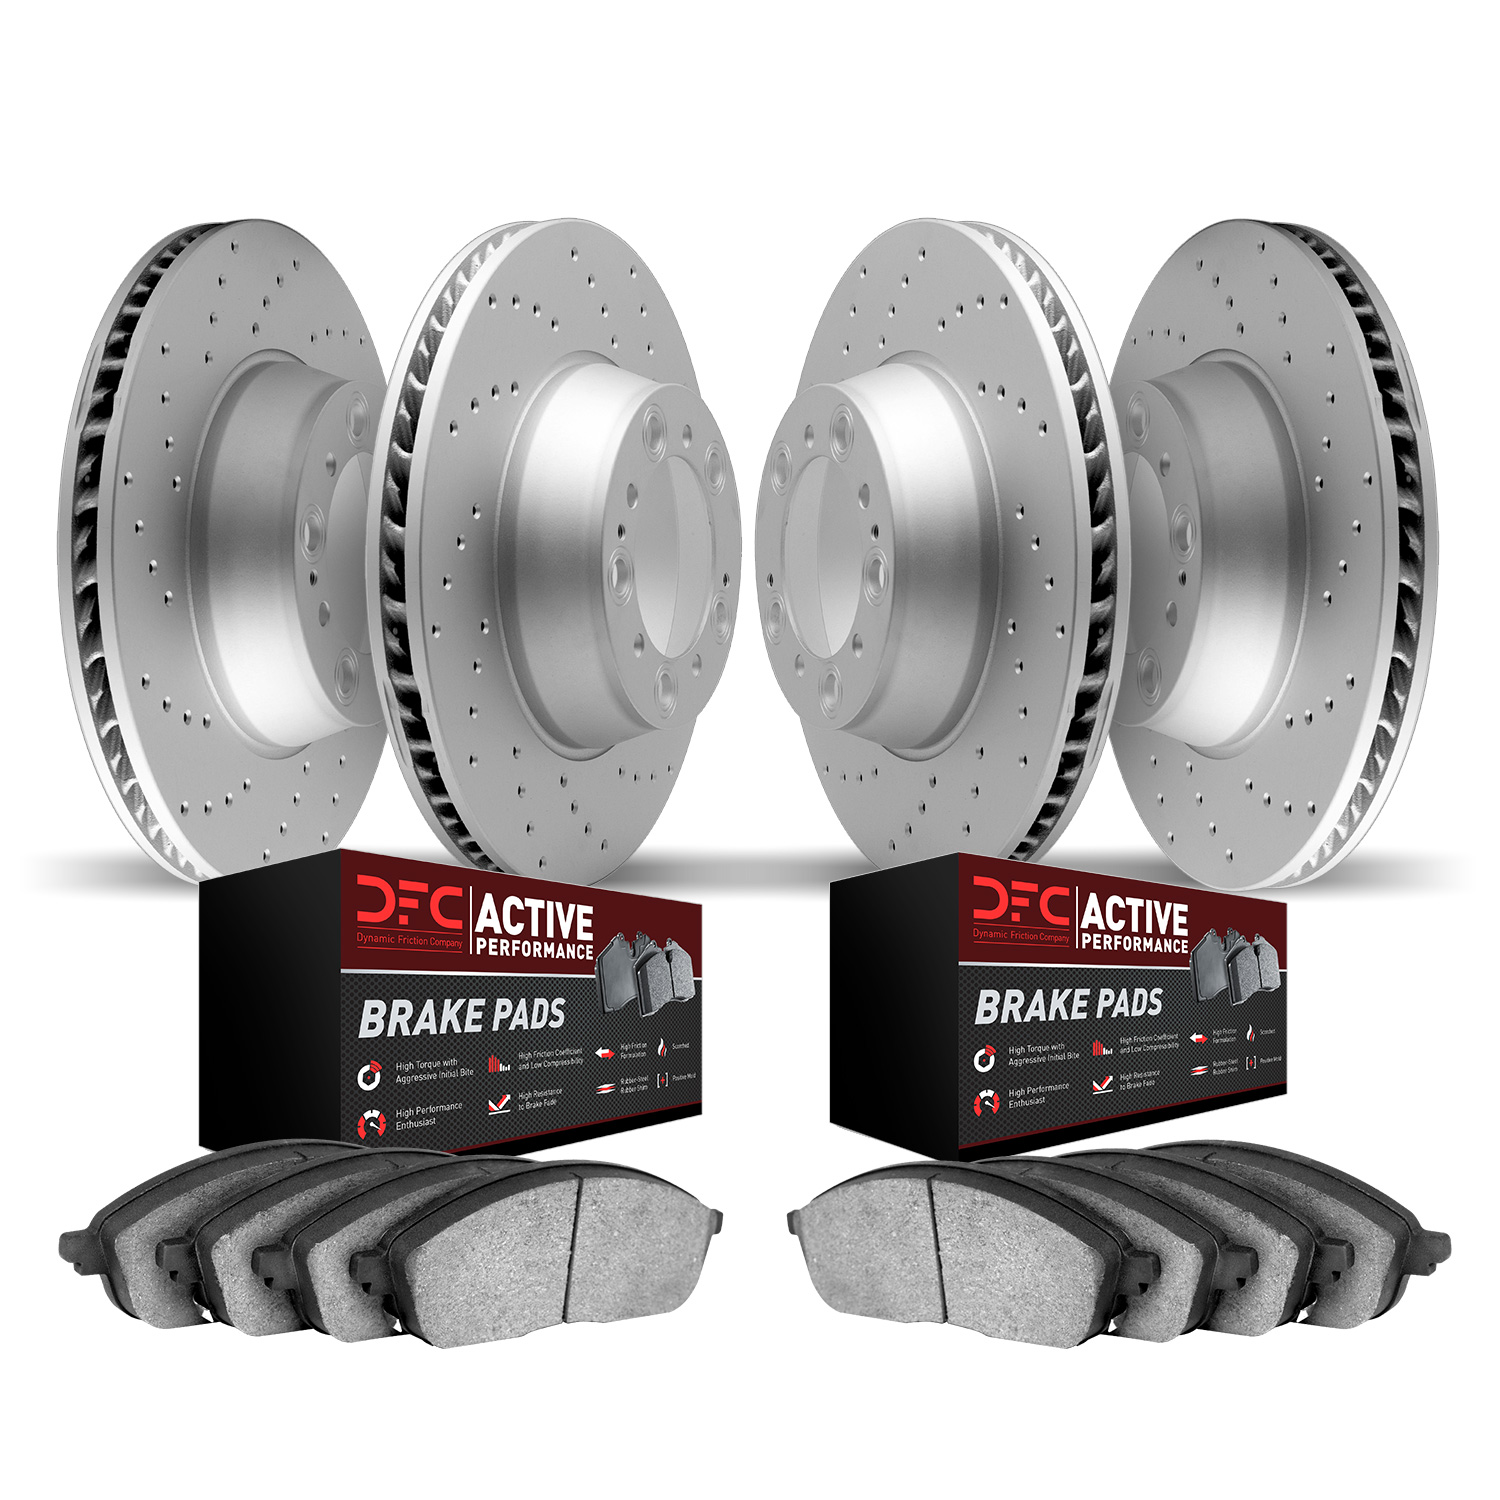 2704-02004 Geoperformance Drilled Brake Rotors with Active Performance Pads Kit, 1975-1983 Porsche, Position: Front and Rear